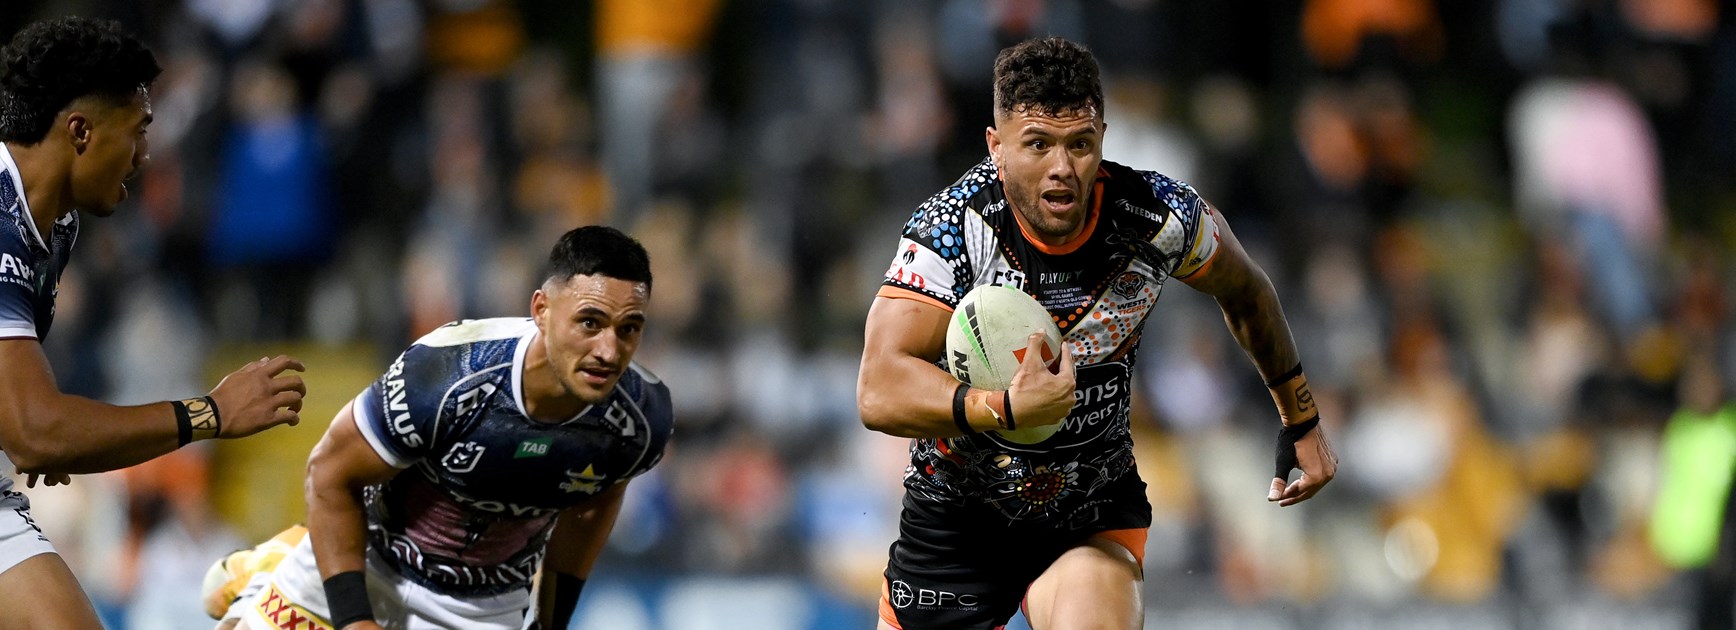 Star centre believes Tigers can continue to bring out his best